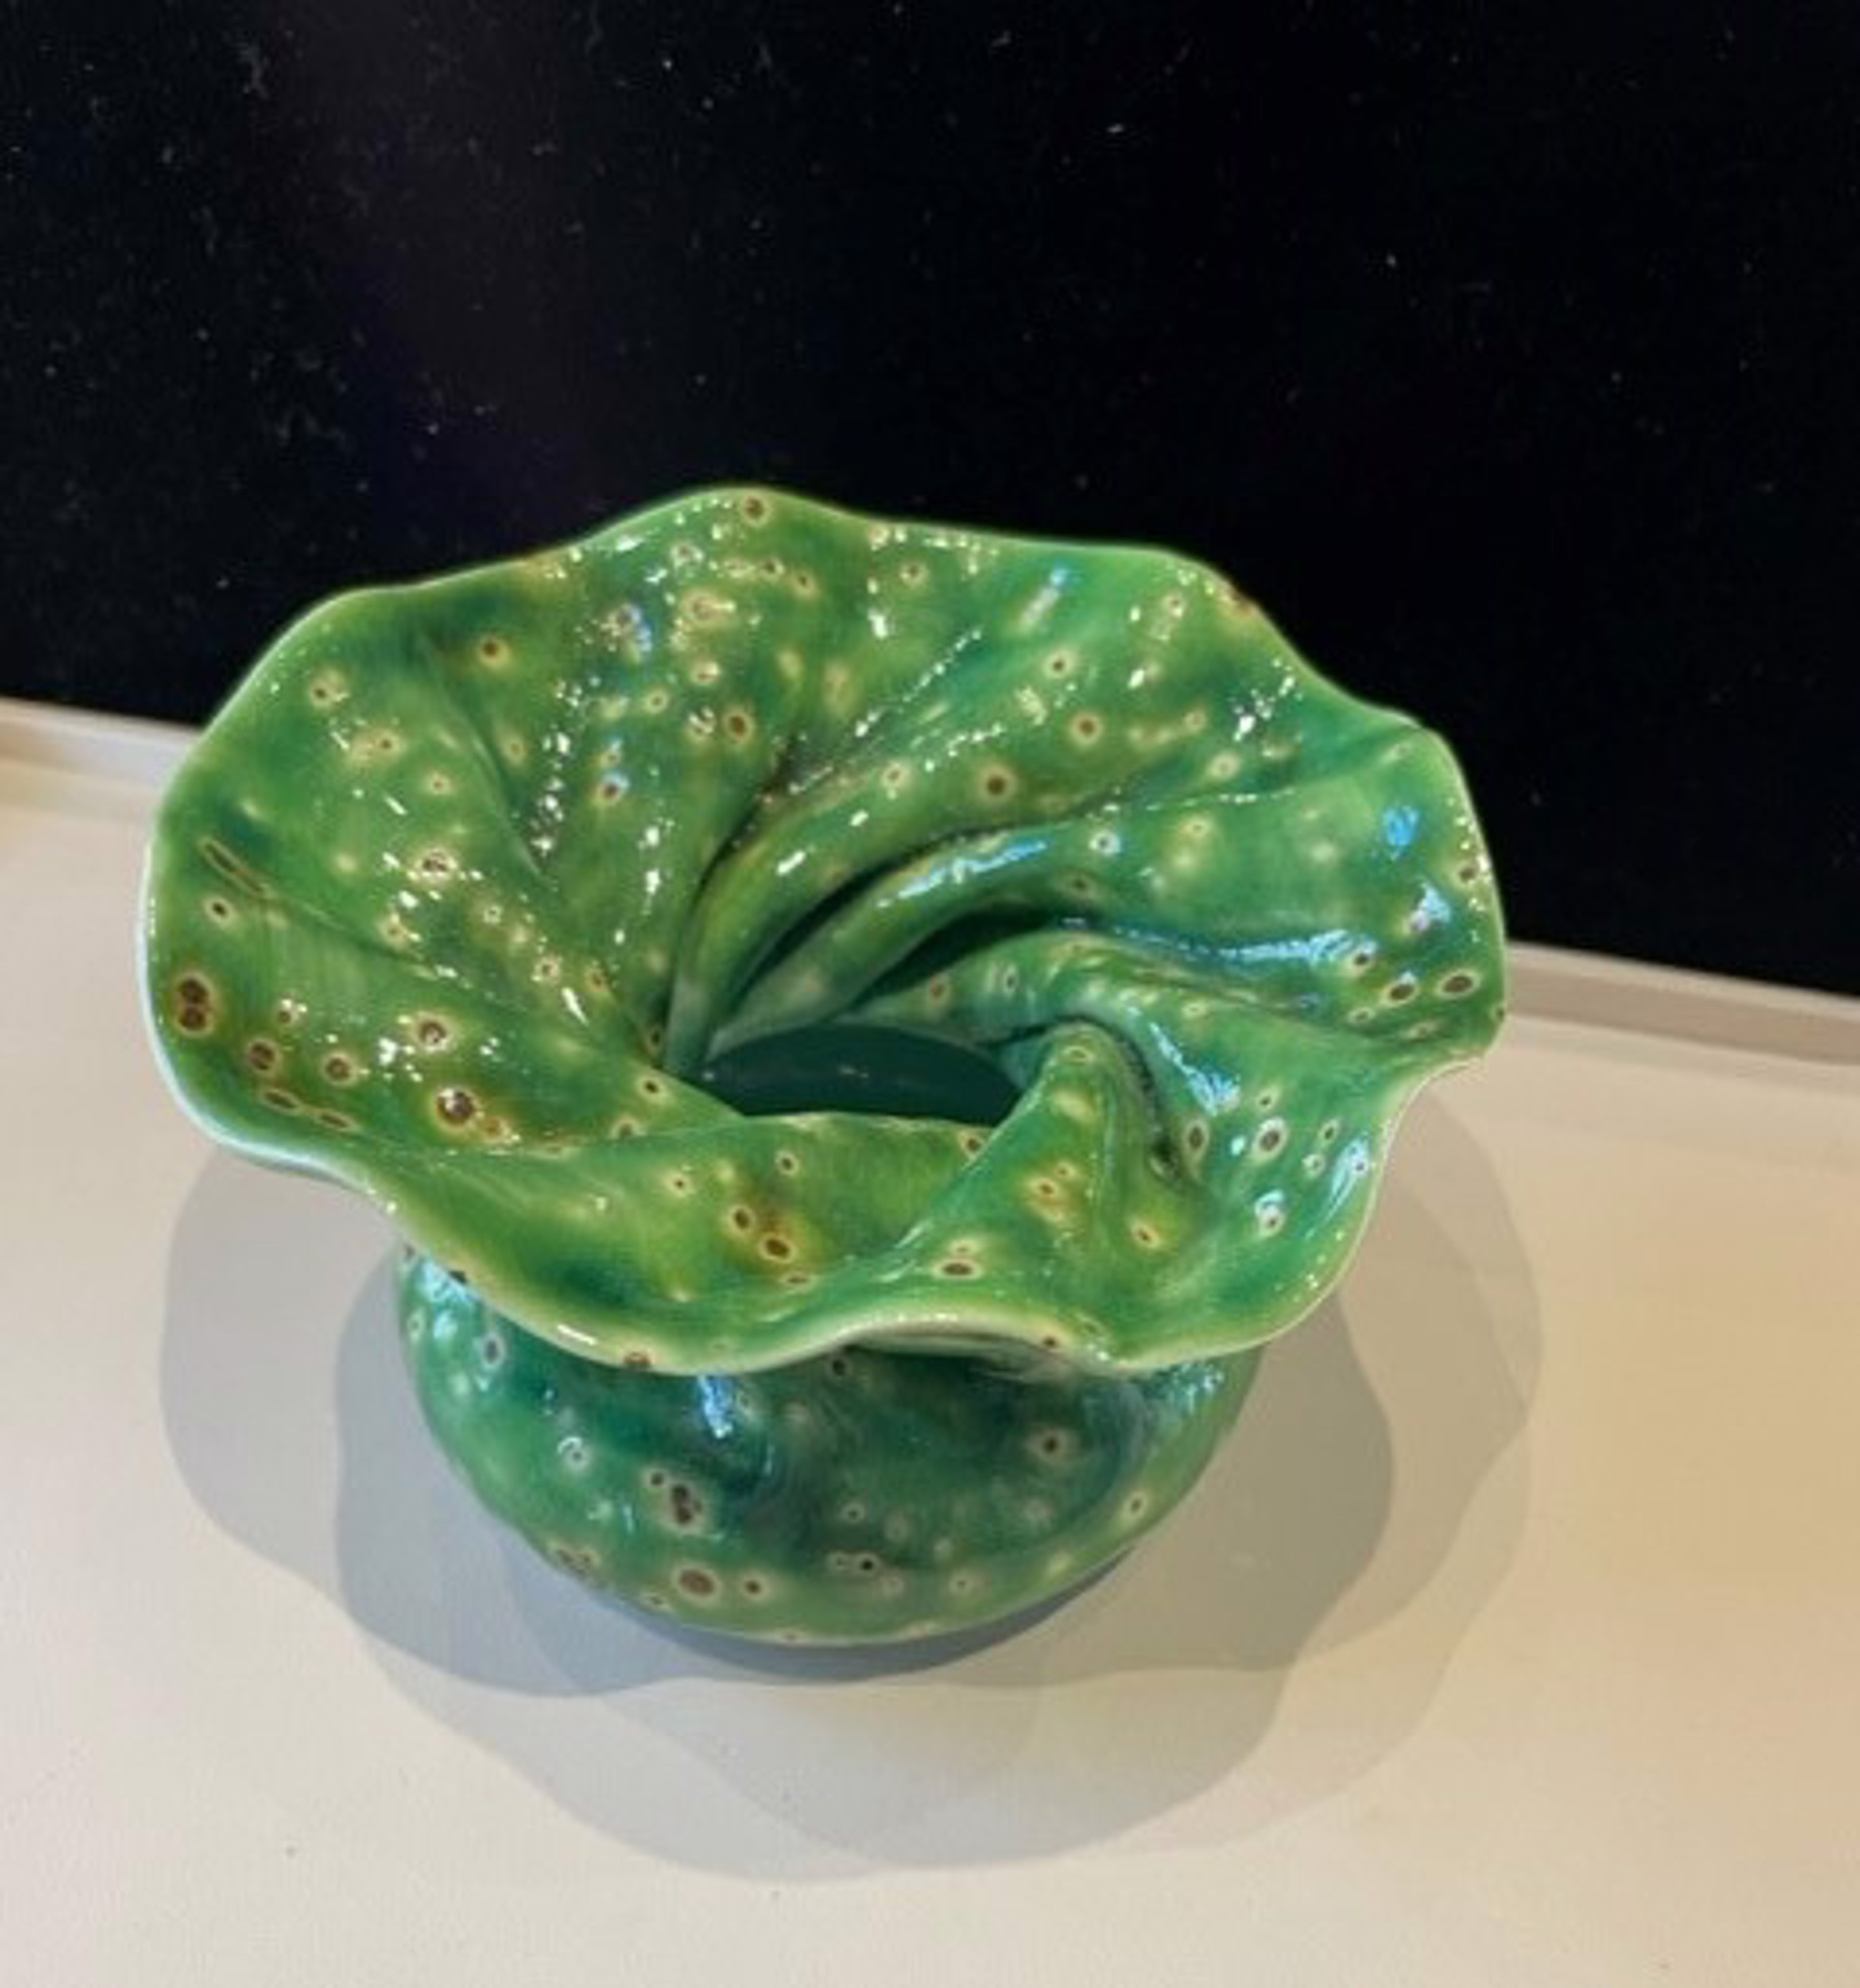 Clarkhouse #96 Spotted green full ruffle top vase by Bill & Pam Clark Clark House Pottery